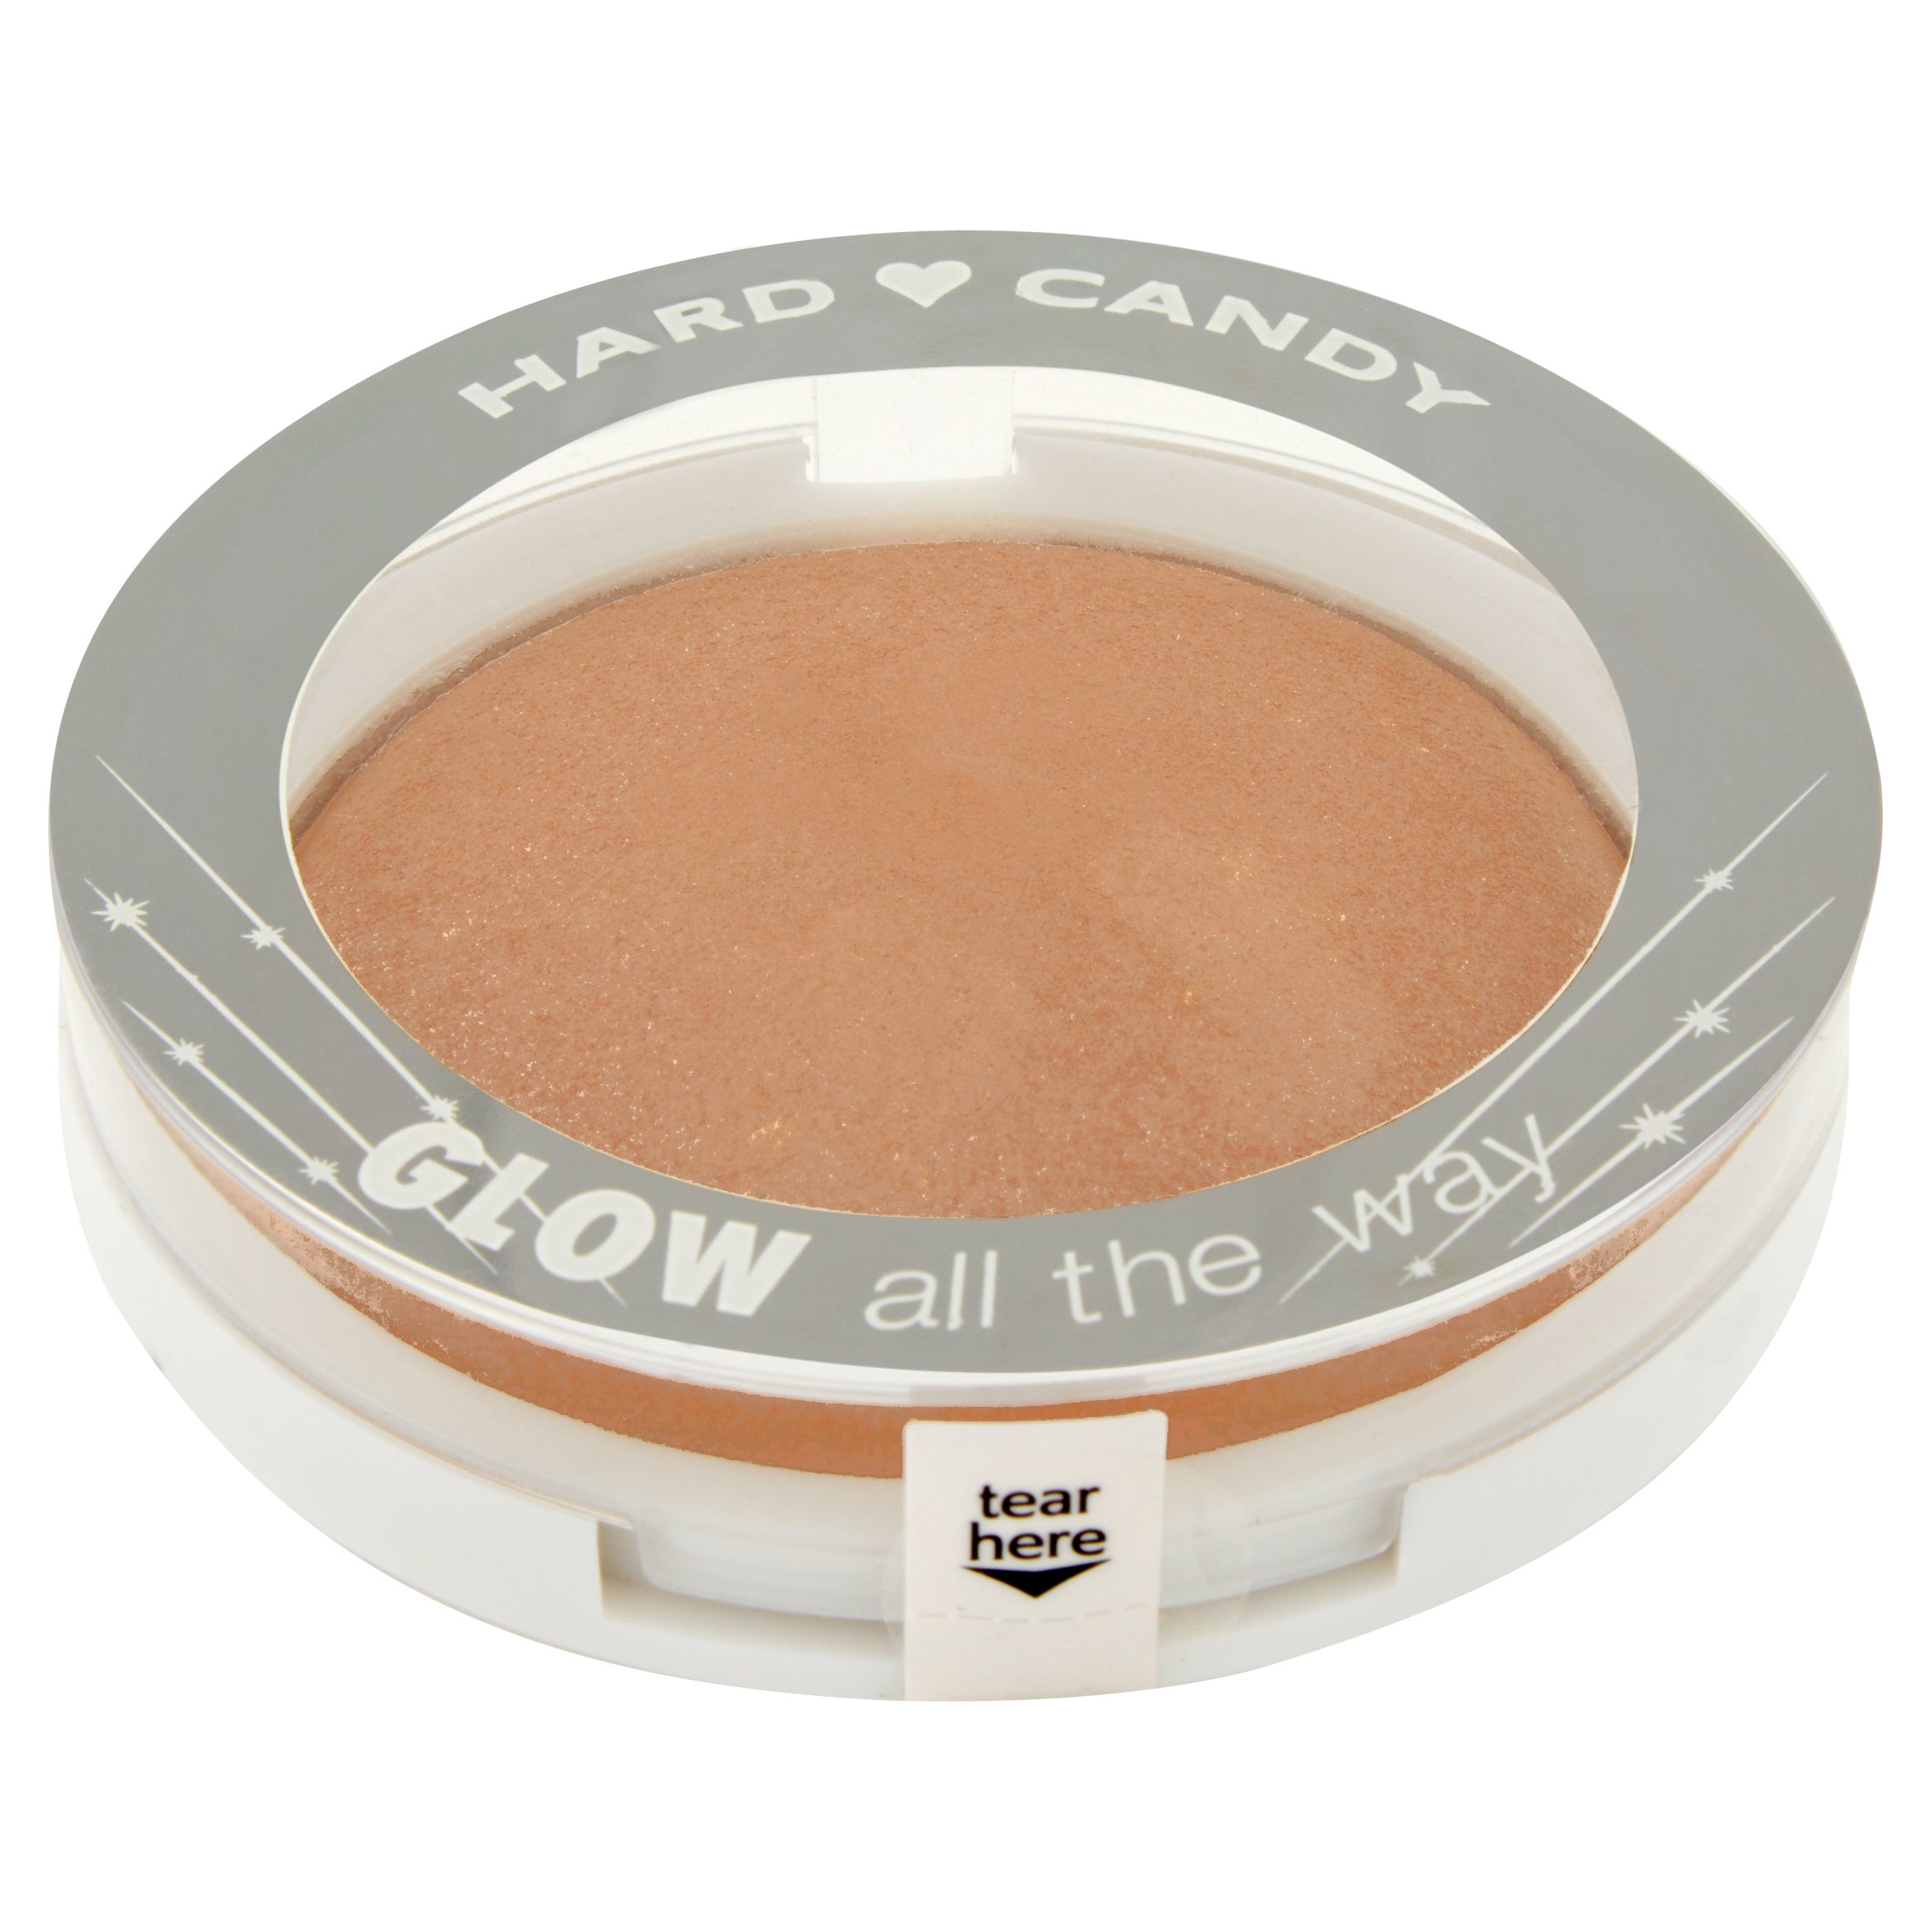 Hard Candy Glow All the Way 129 Tiki Baked Bronzer, 0.46 oz - image 2 of 5